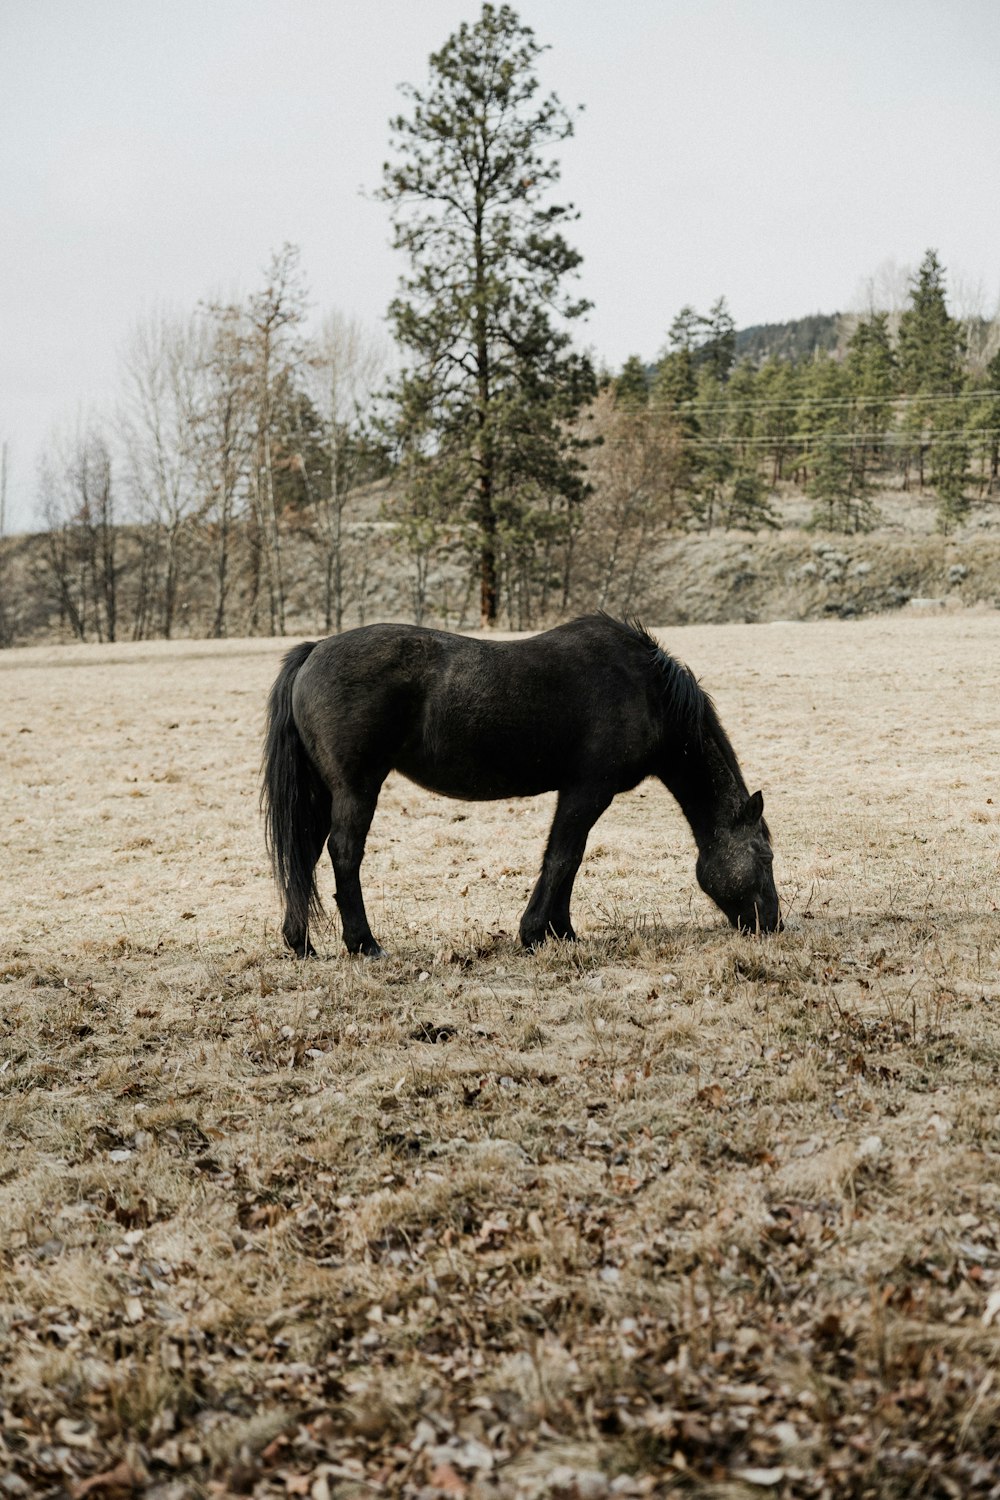 a black horse grazing on dry grass in a field